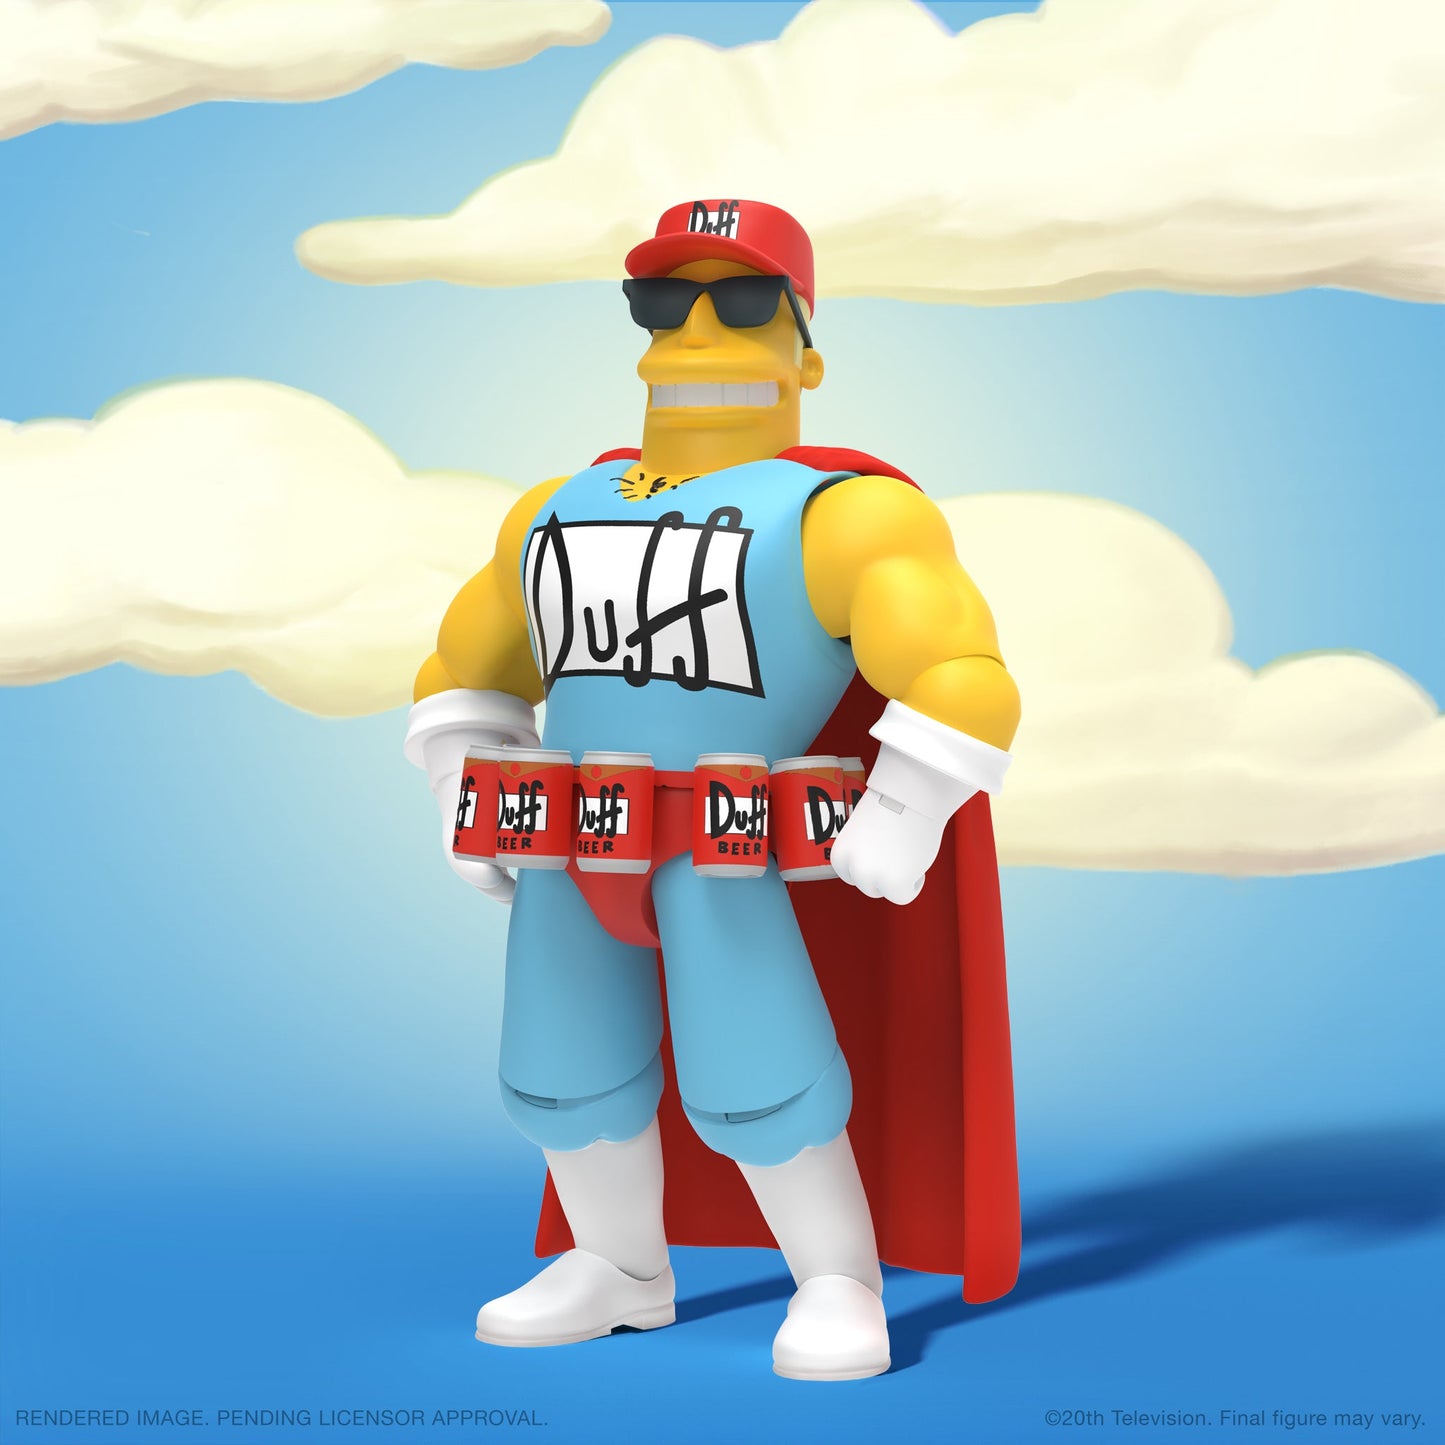 The Simpsons ULTIMATES! Wave 2 - Duffman